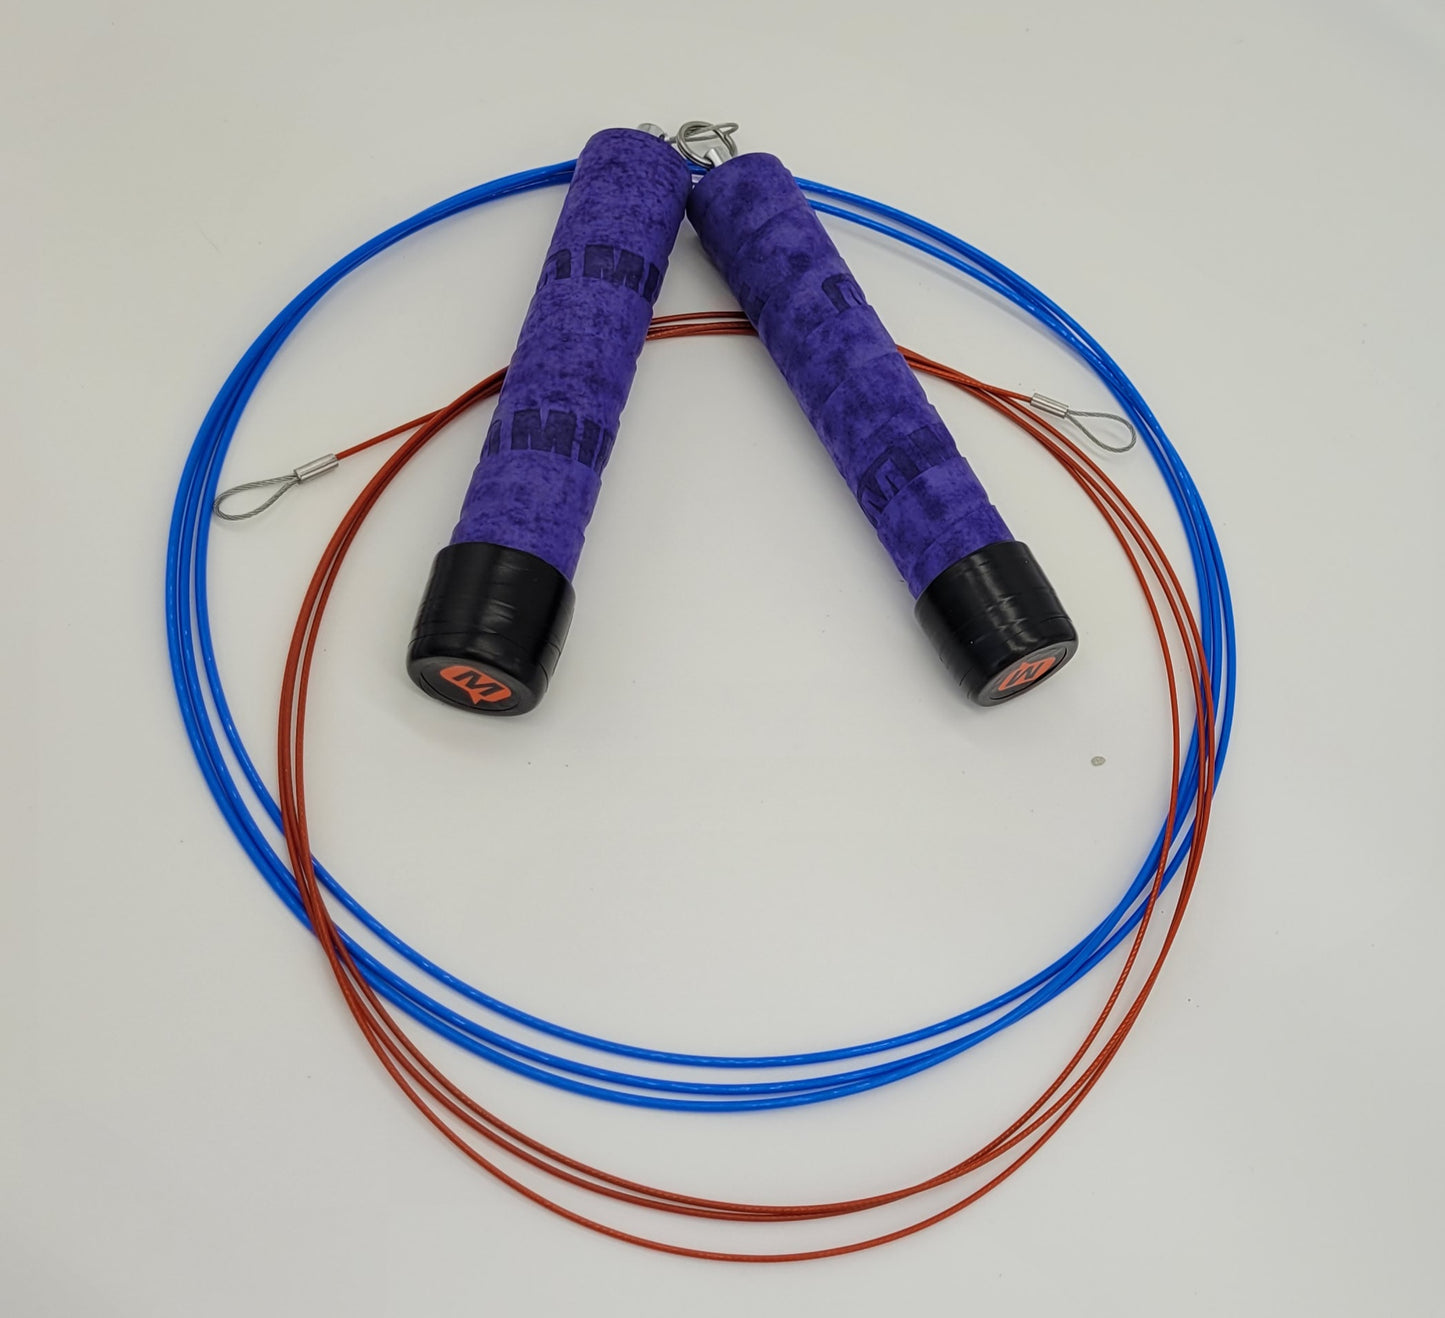 Custom Speed Jump Rope with Replacement Cable (Intermediate - Advanced)